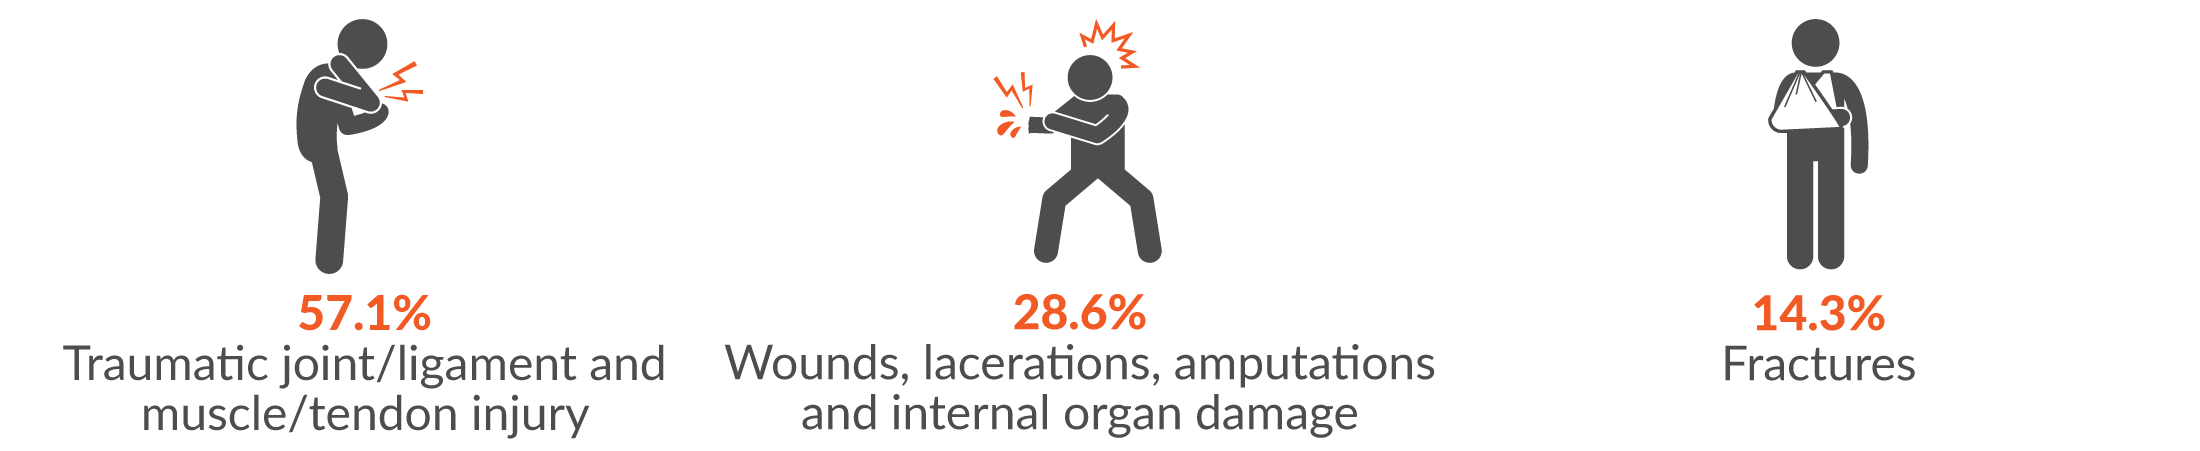 57.1% traumatic joint/ligament and muscle/tendon injury; 28.6% wounds, lacerations, amputations and internal organ damage; and 14.3% fractures 